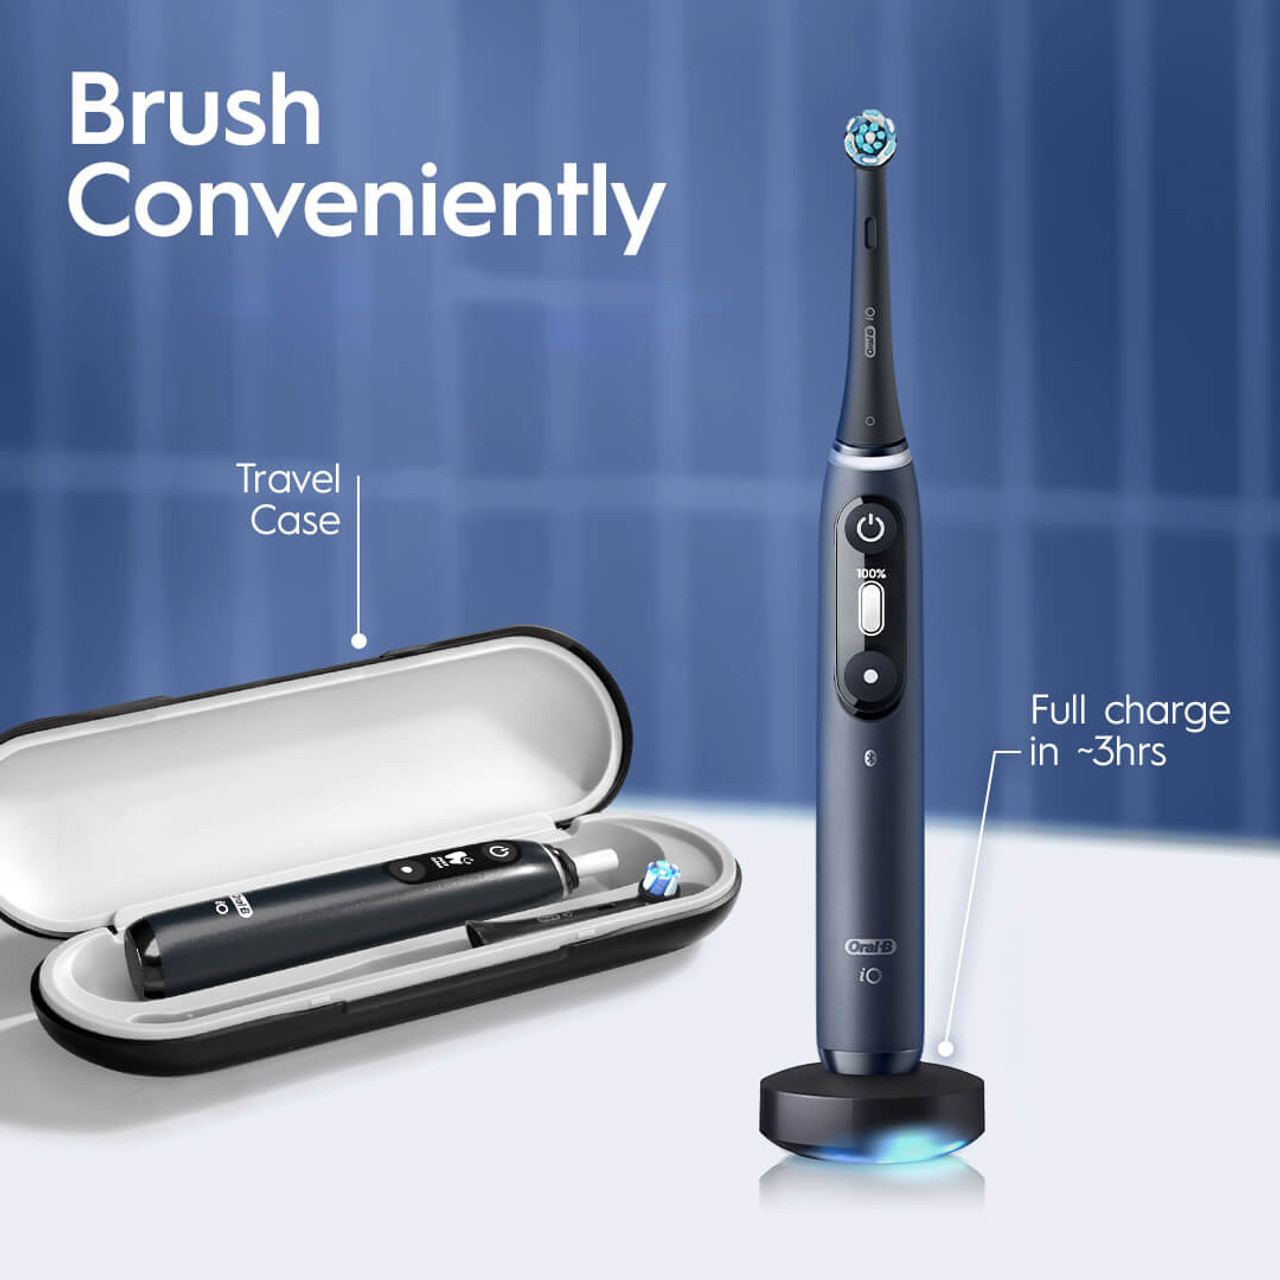 Oral-B iO Series 7 Electric Toothbrush Twin Pack | Oral-B